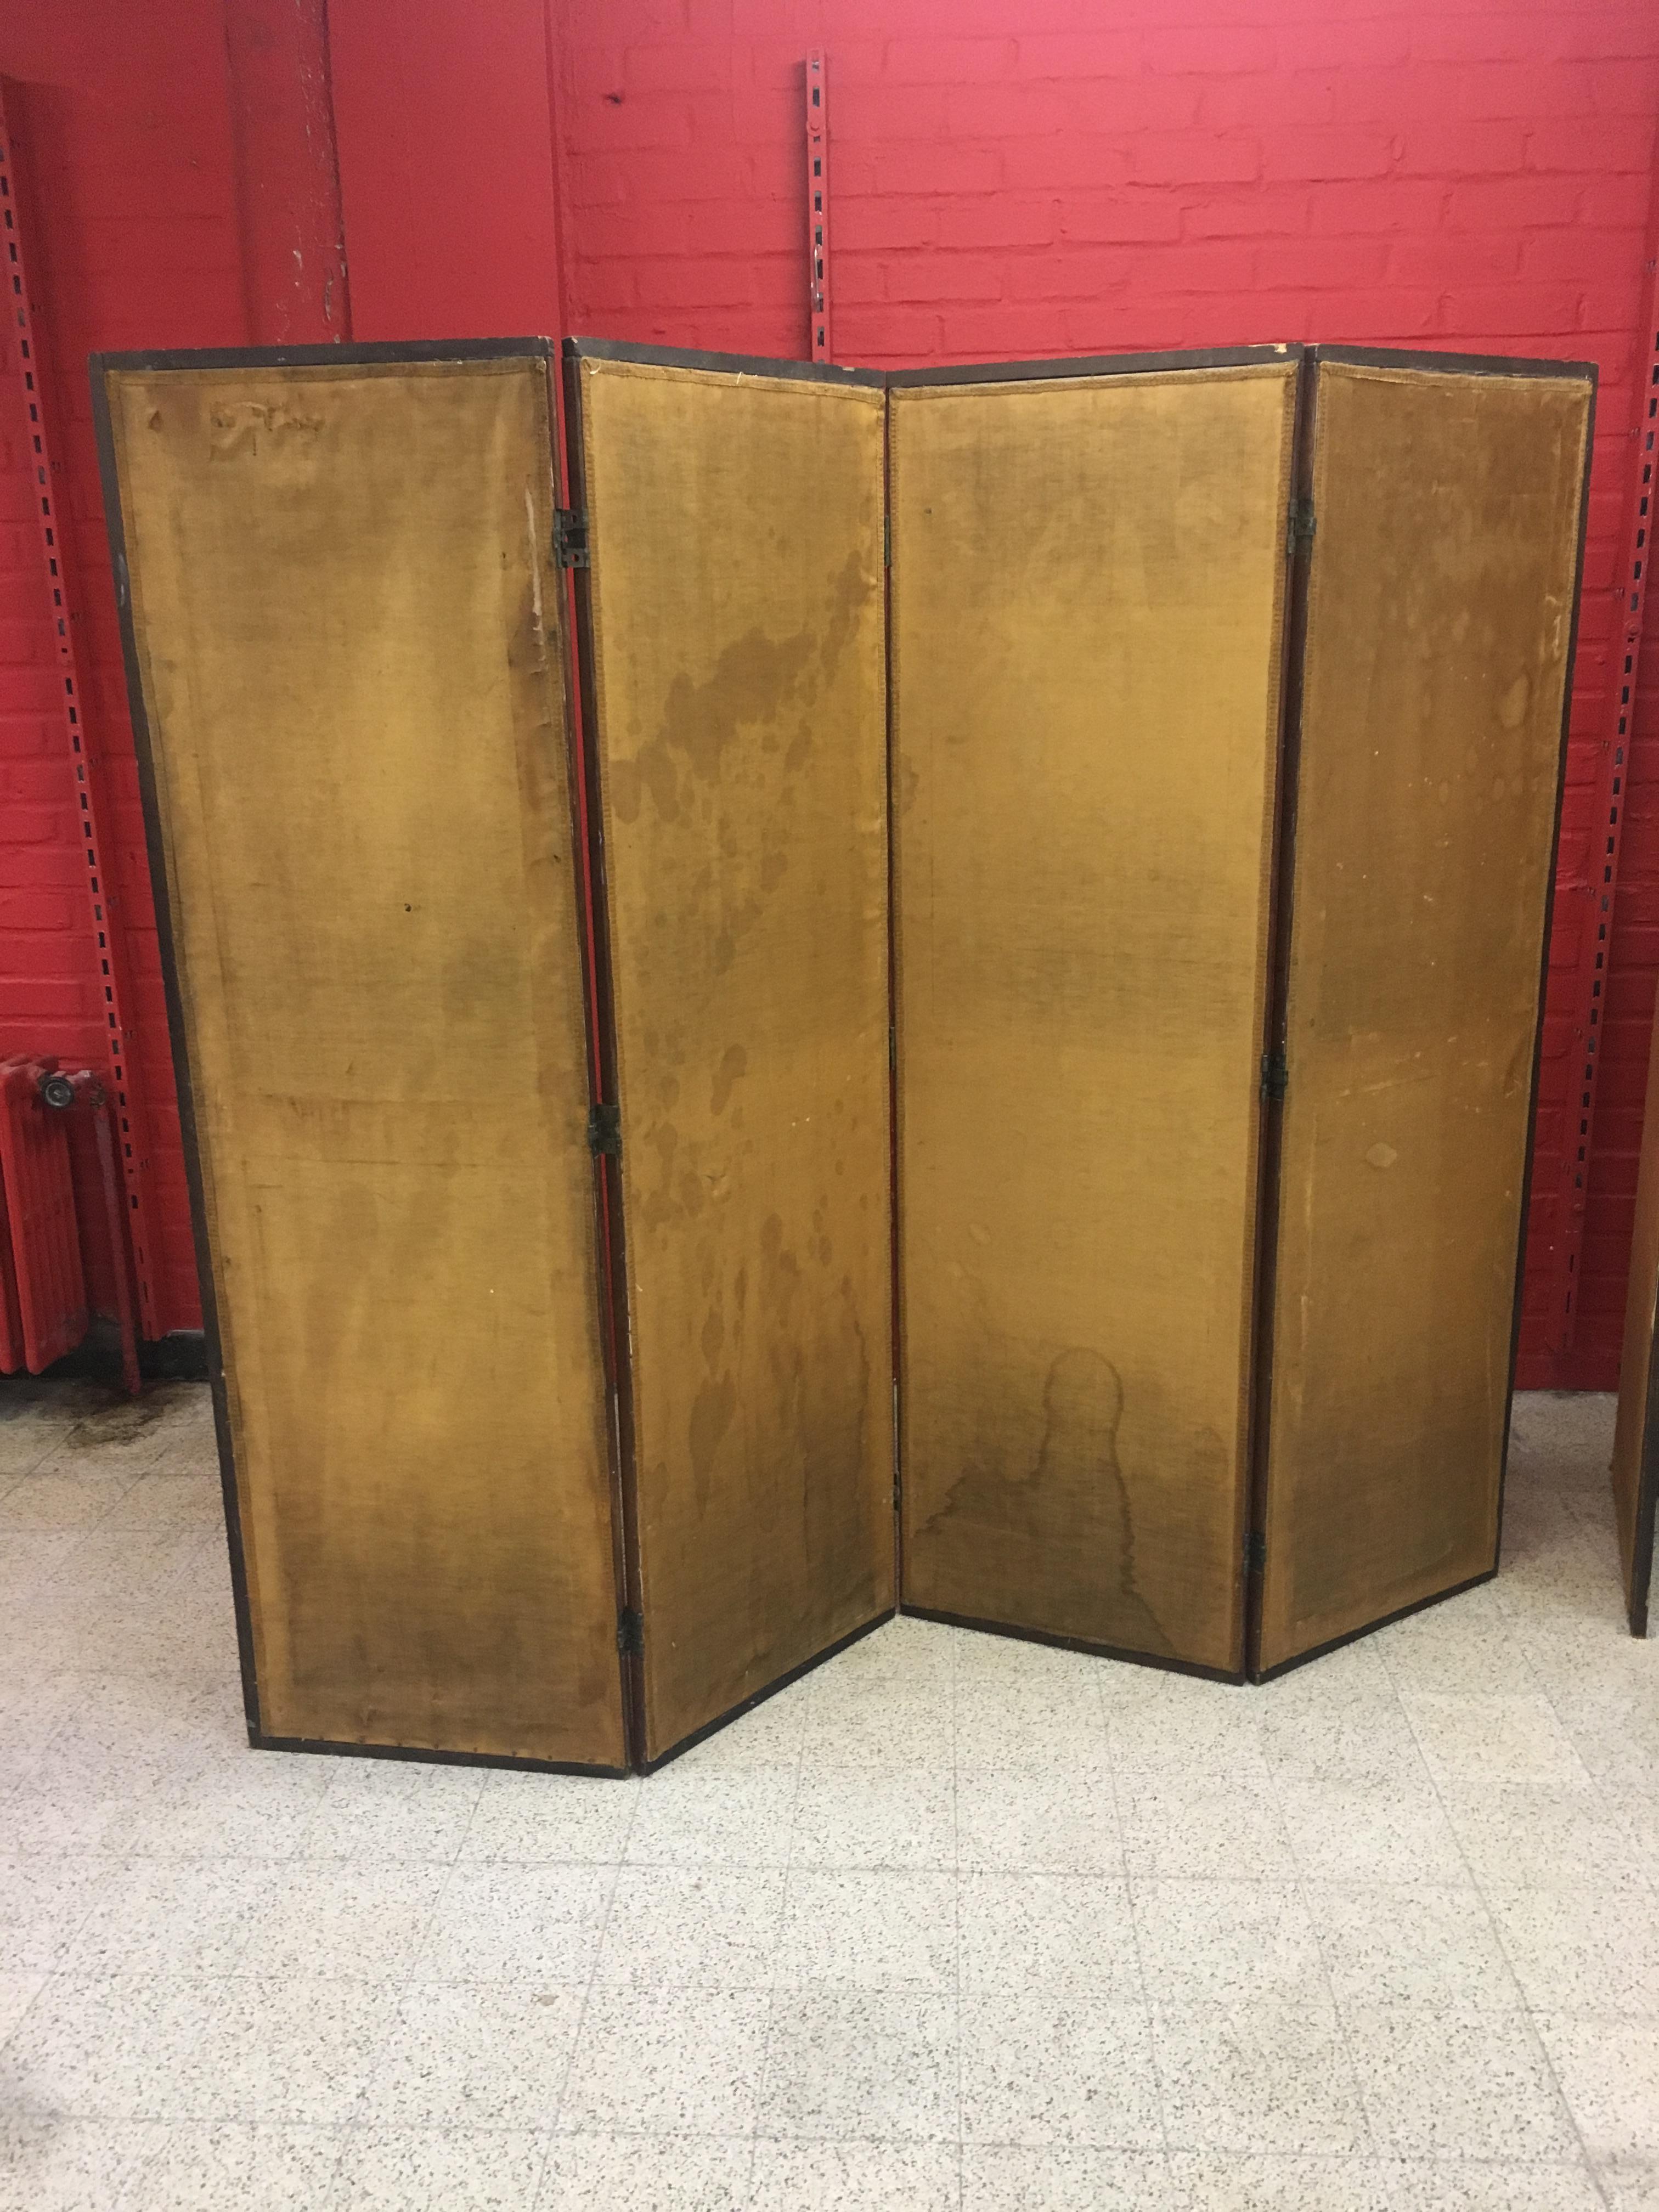 Rare Folding Screen Period 1900, Composed of Two Elements, circa 1900 For Sale 9